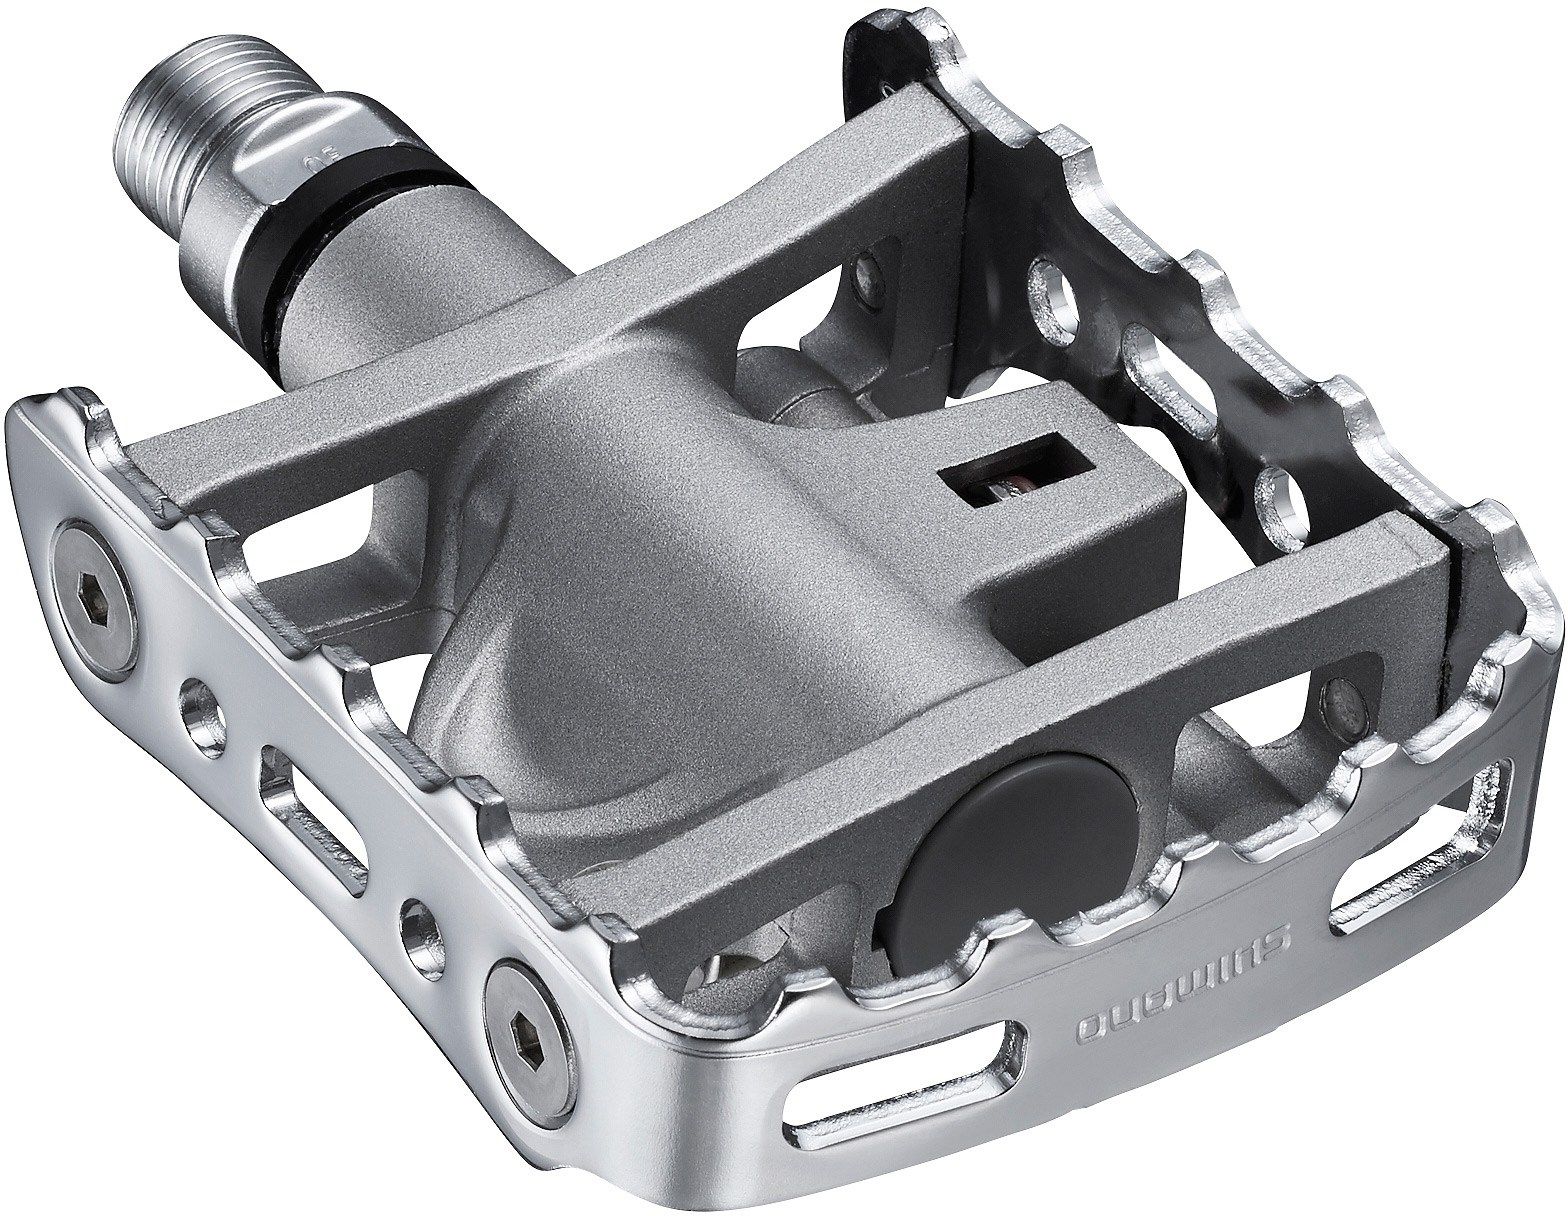 Shimano M324 Spd Mtb Pedals One Sided Mechanism - £51.99 | Road ...